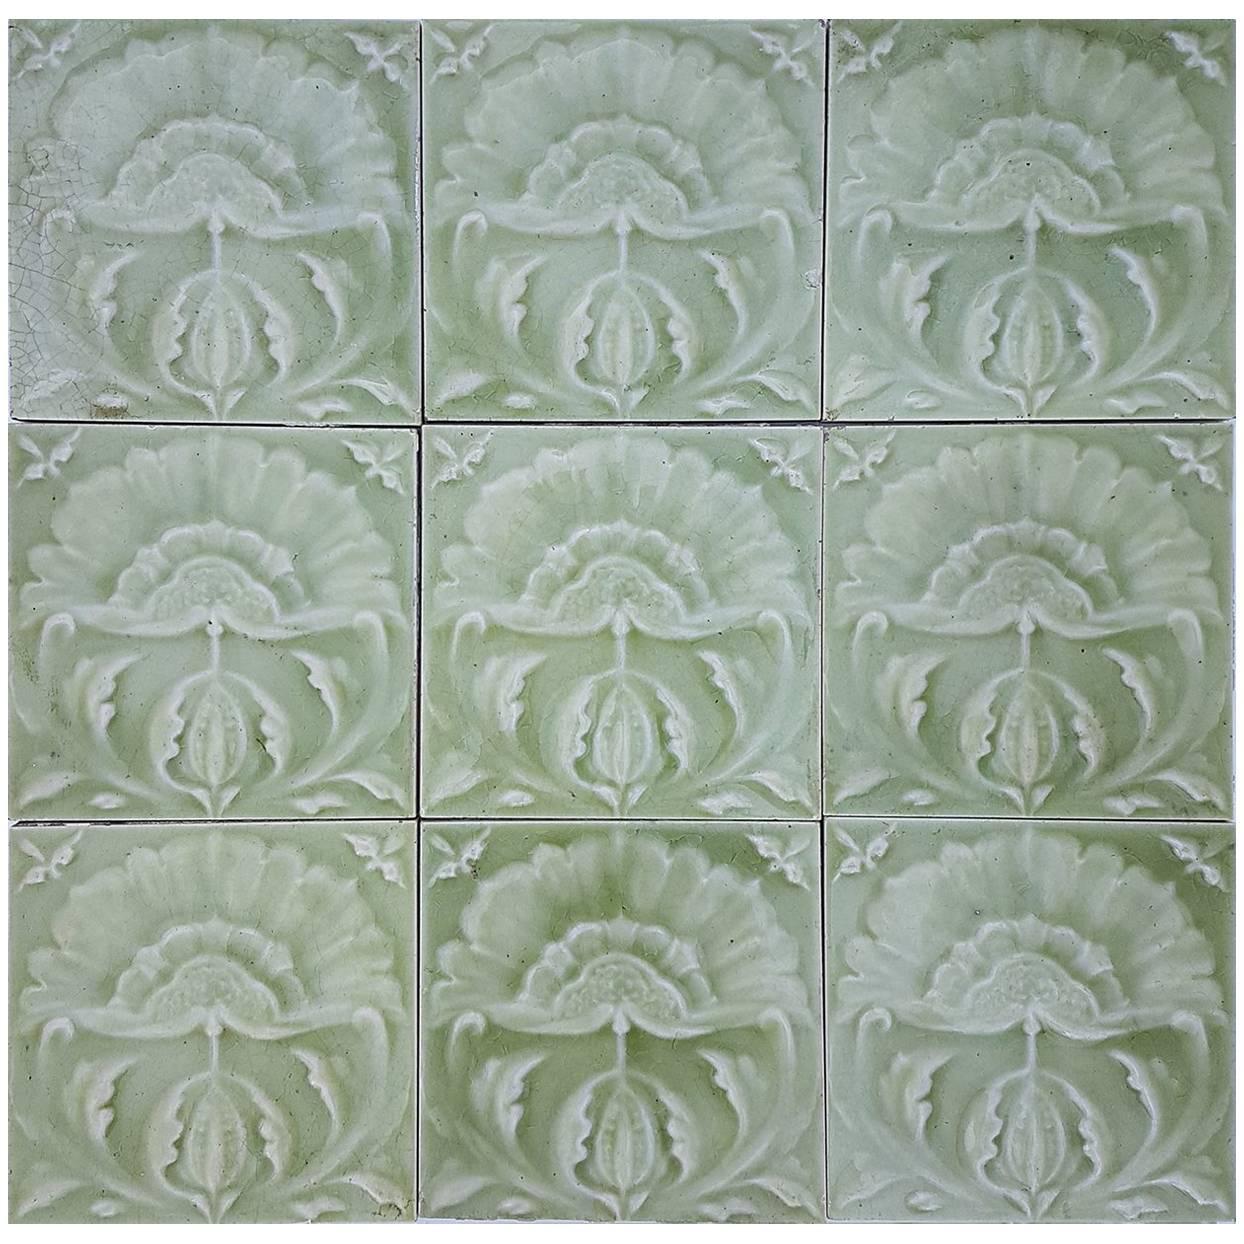 A stunning Art Nouveau/ Arts & Crafts tile panel from the superb firm, Craven Dunnill, & Co., Ltd, Jackfield Salop, England, circa 1905, in a bright celadon. This quantity original jugenstil tiles by Craven is very rare to find. With beautiful